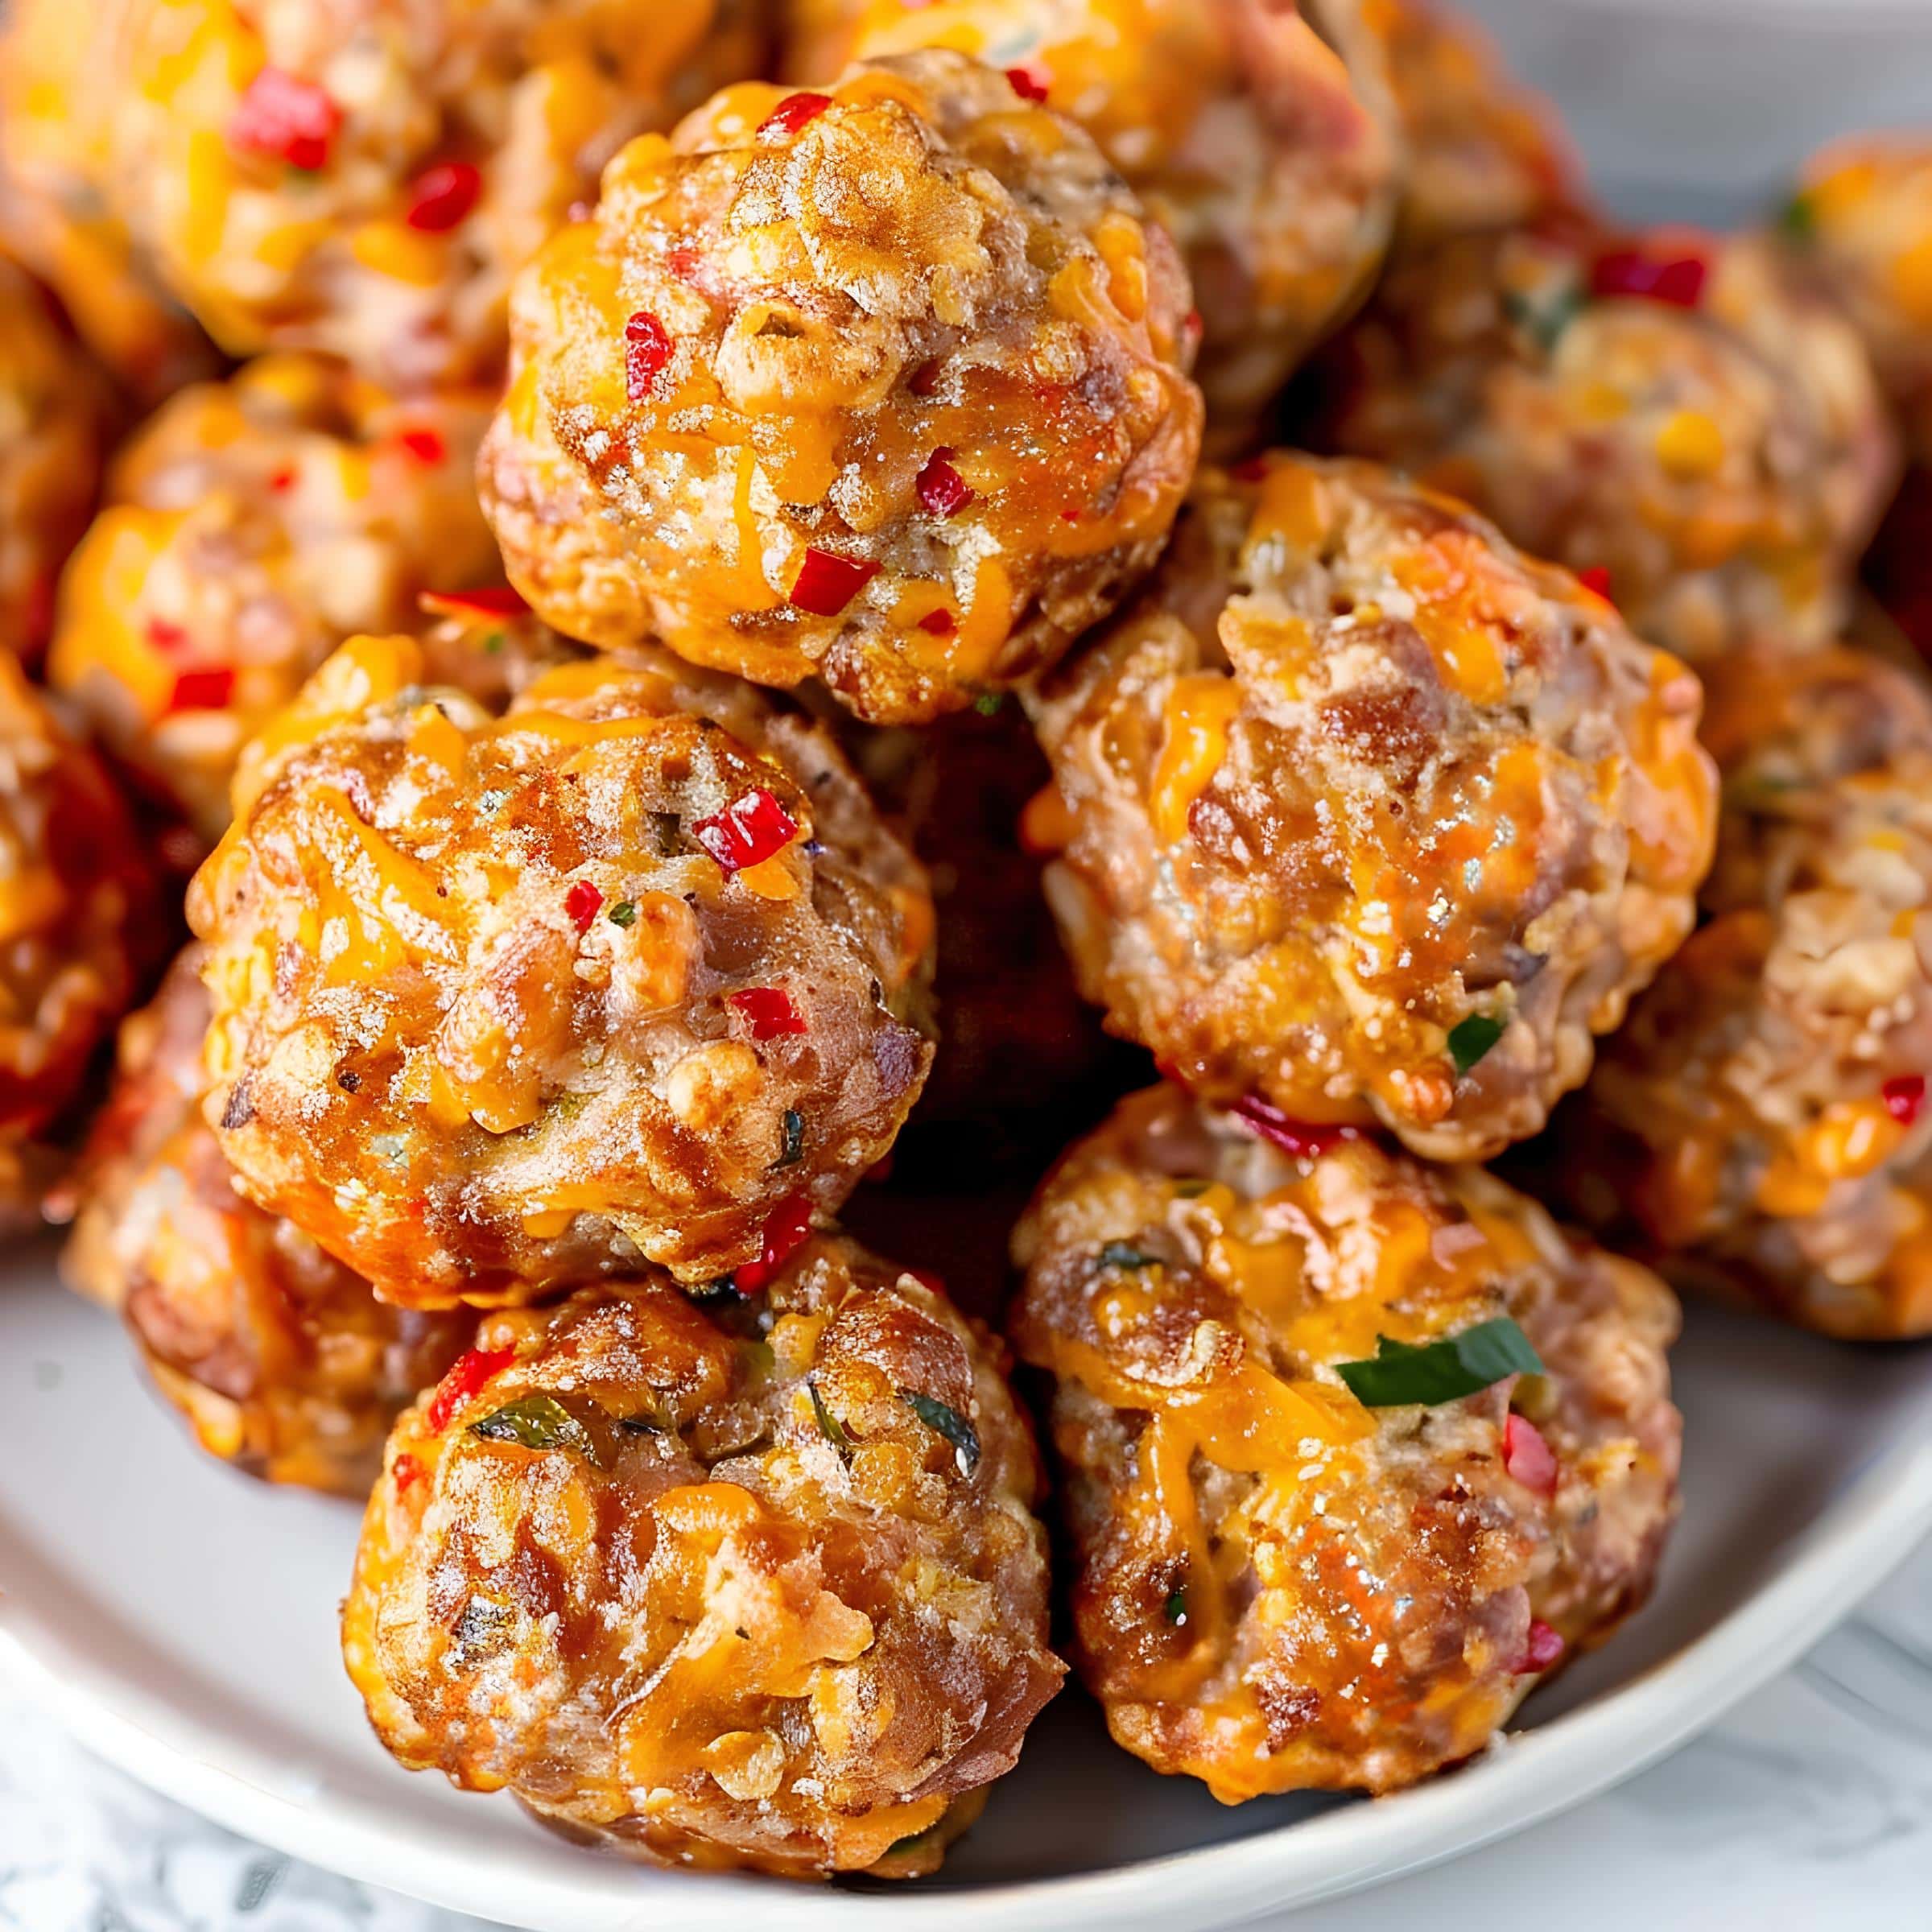 Homemade pimento cheese sausage balls, a mouthwatering treat for cheese and sausage lovers alike